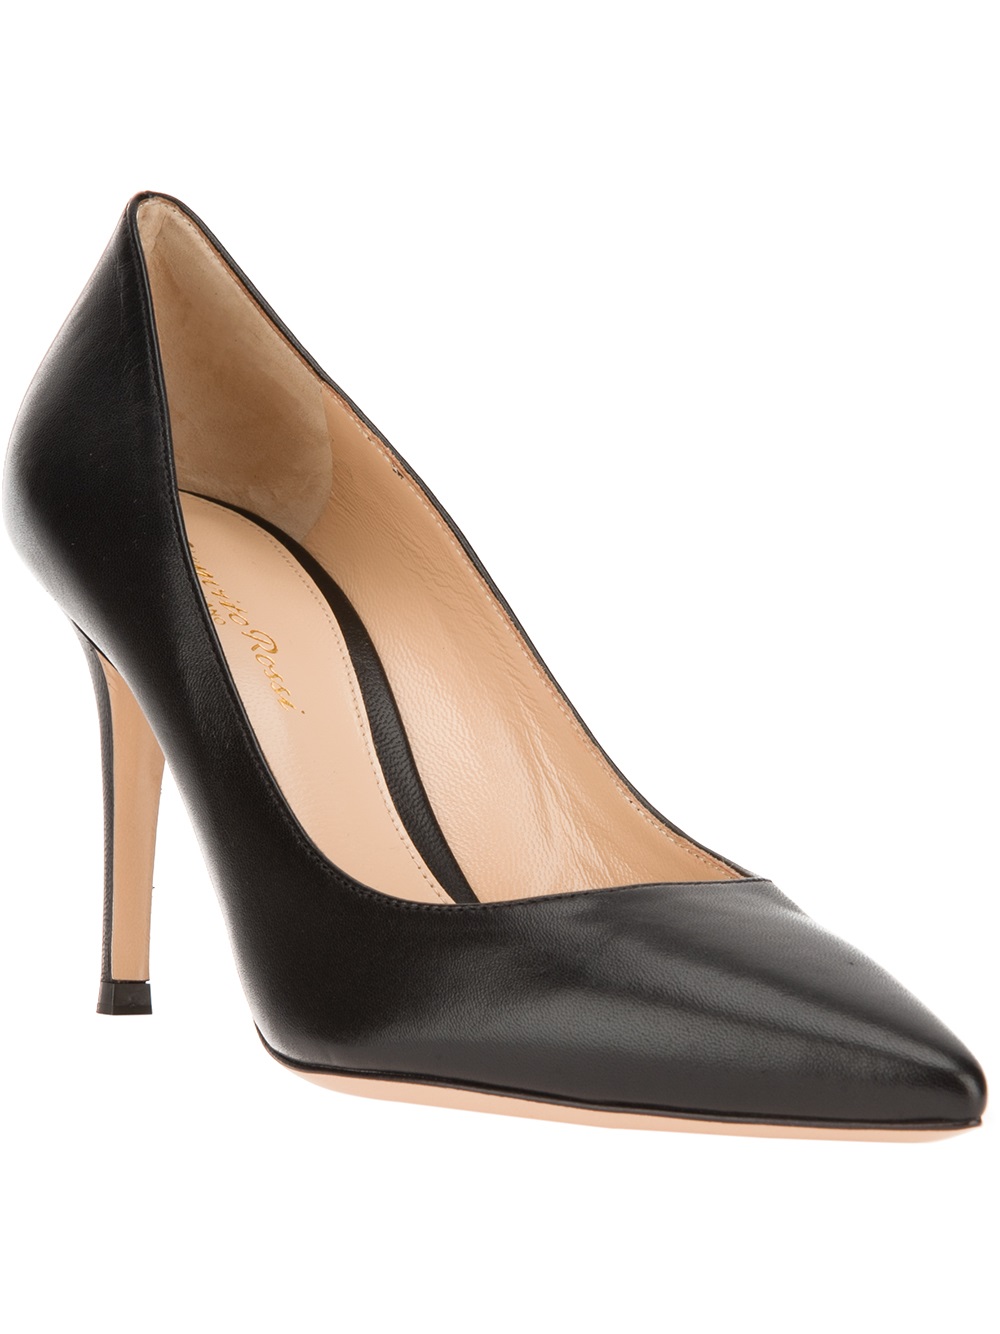 Gianvito rossi Classic Pointed Toe Pumps in Black | Lyst